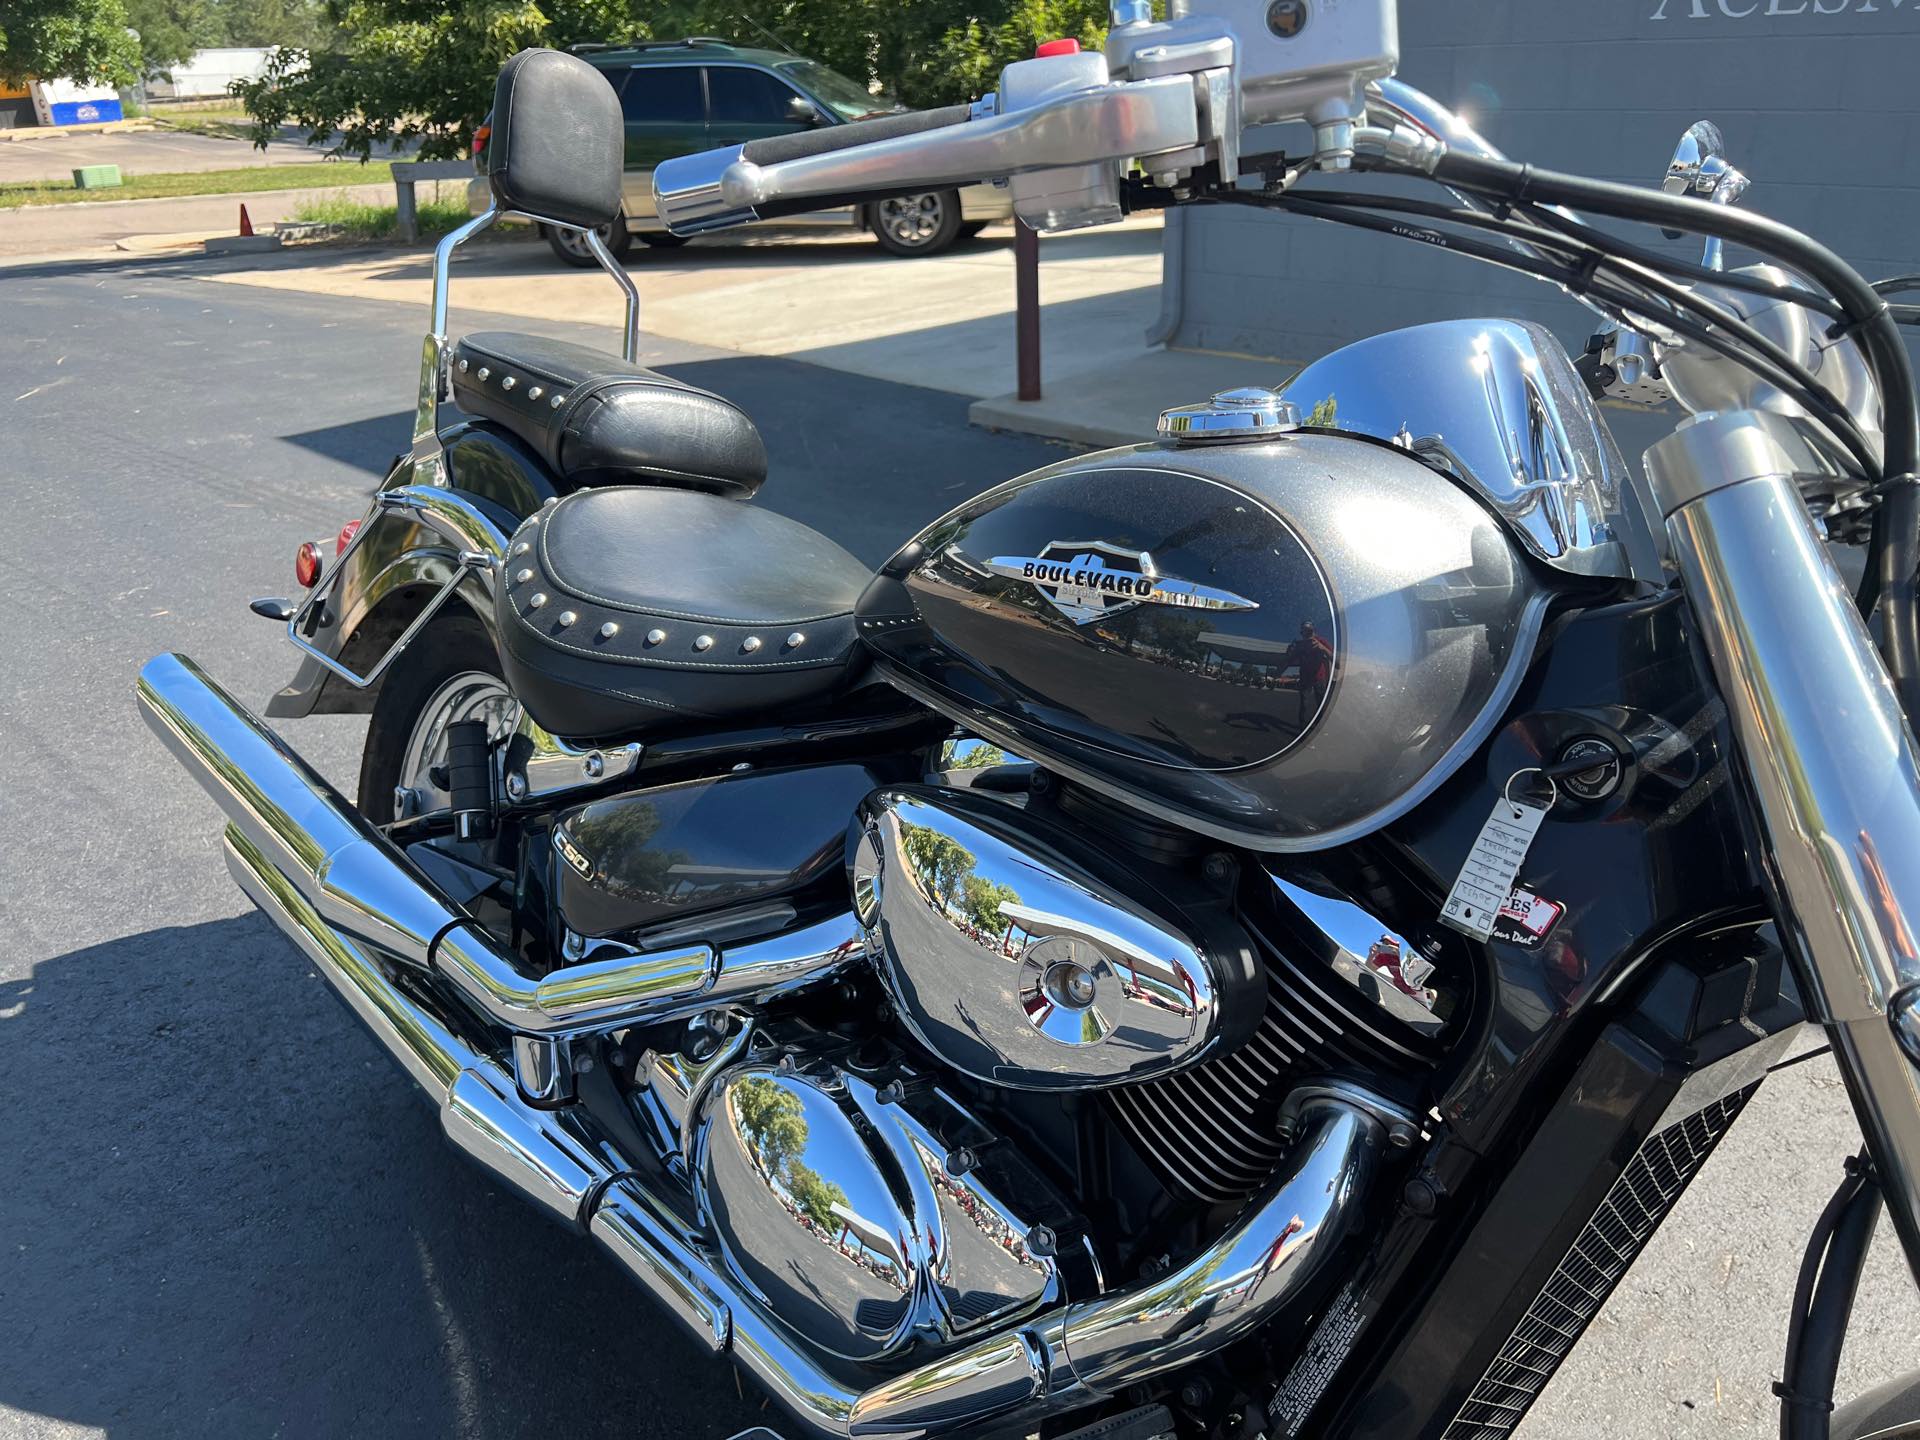 2008 Suzuki Boulevard C50 at Aces Motorcycles - Fort Collins